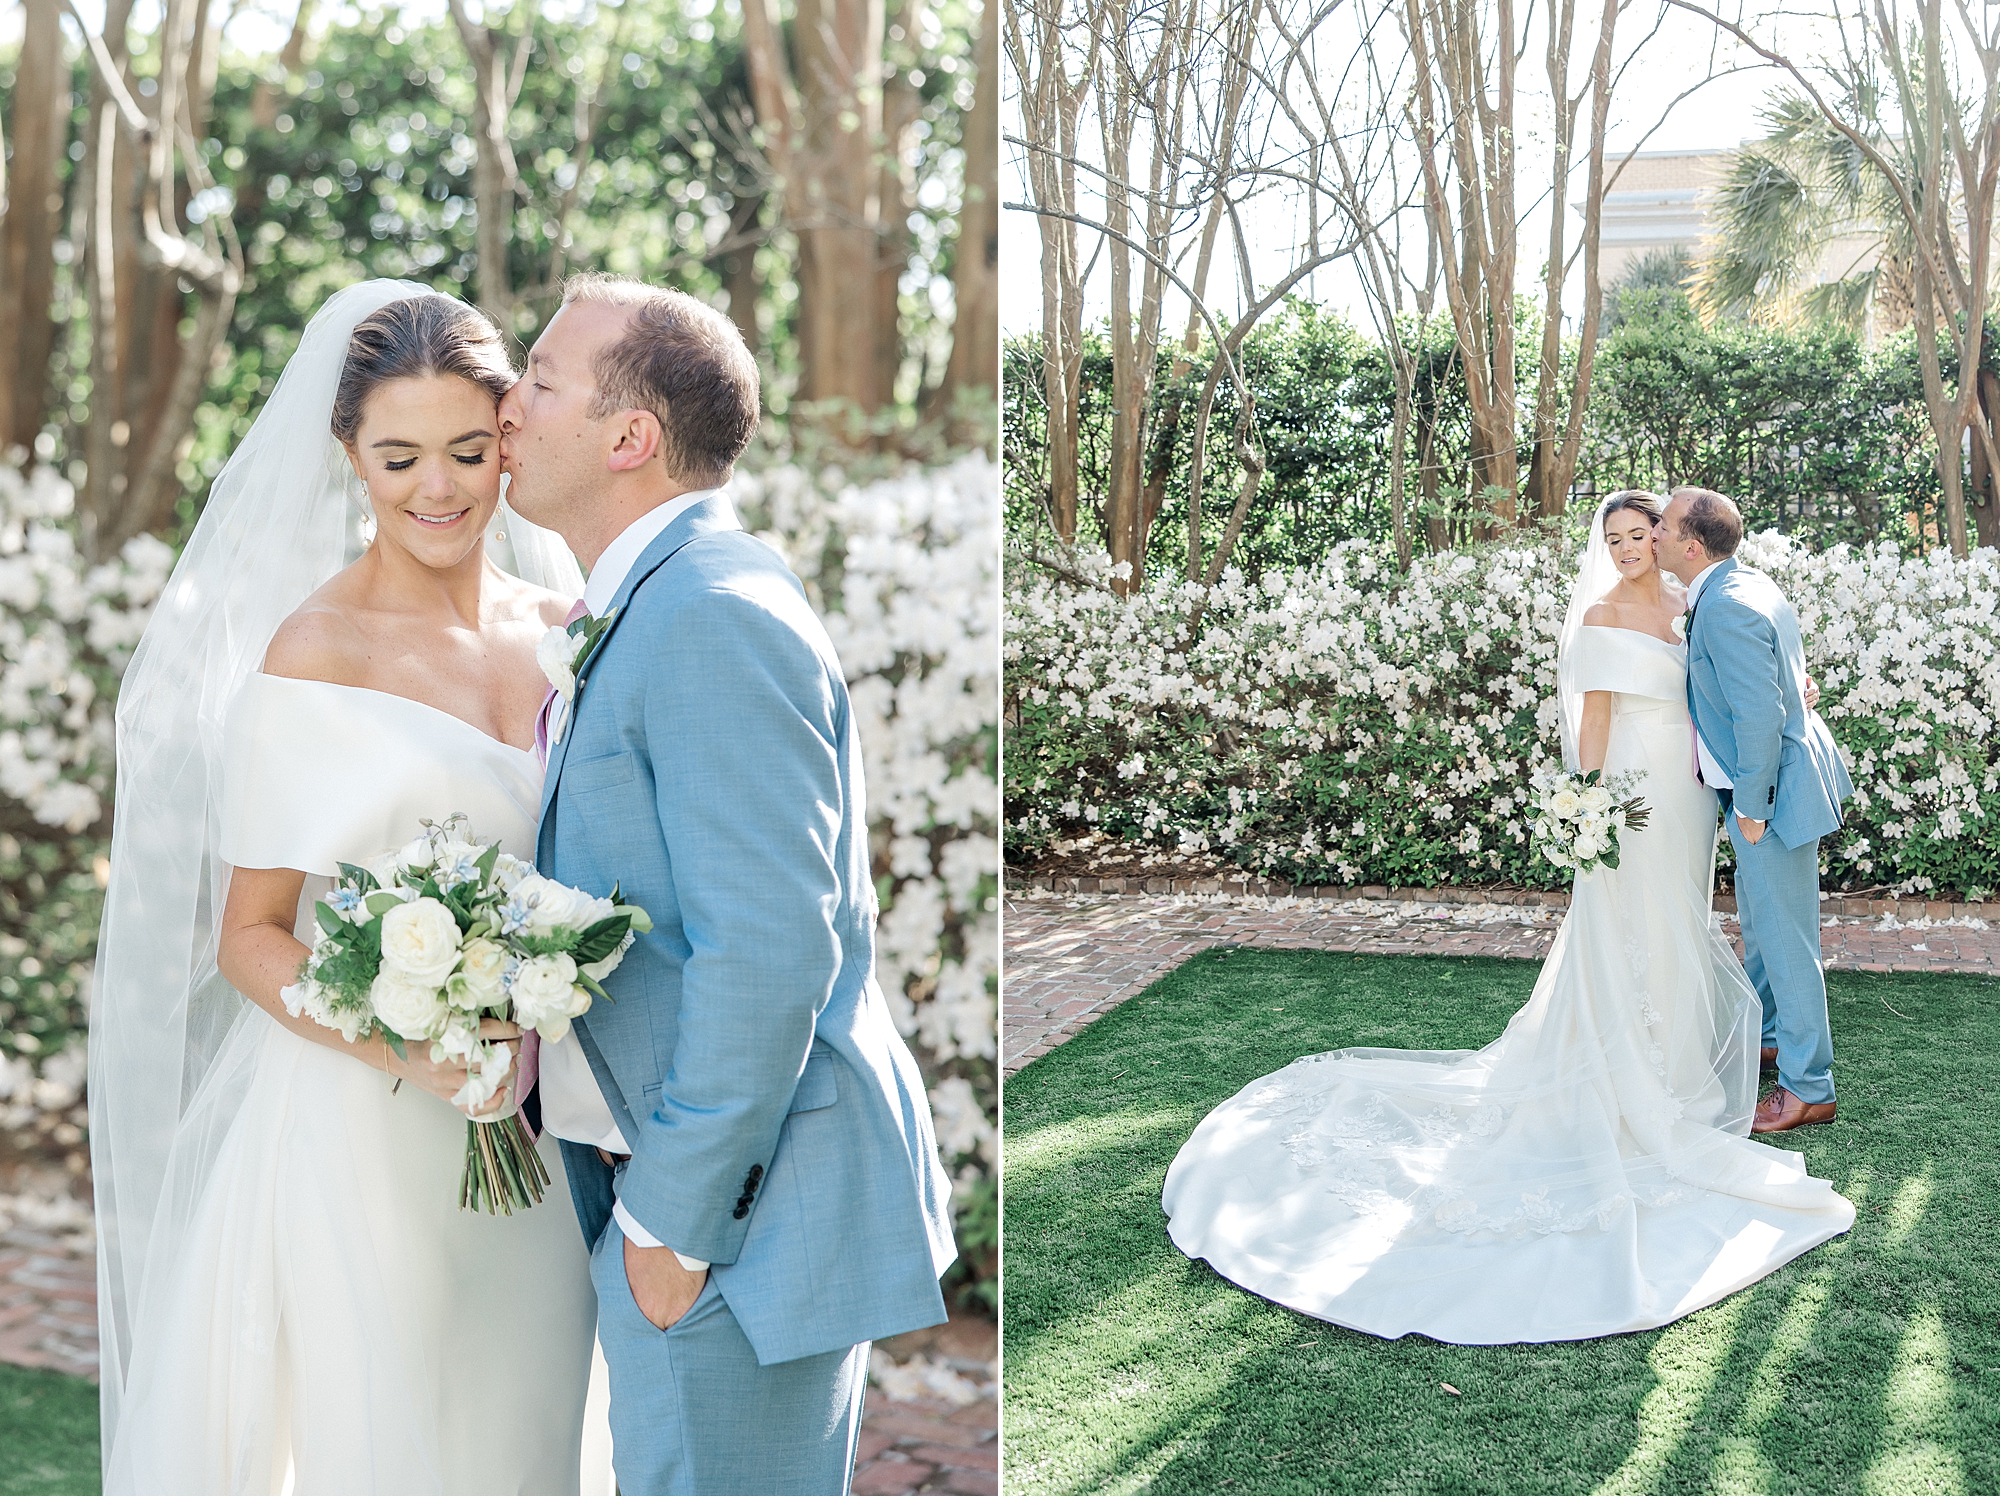 newlywed portraits in garden after wedding ceremony